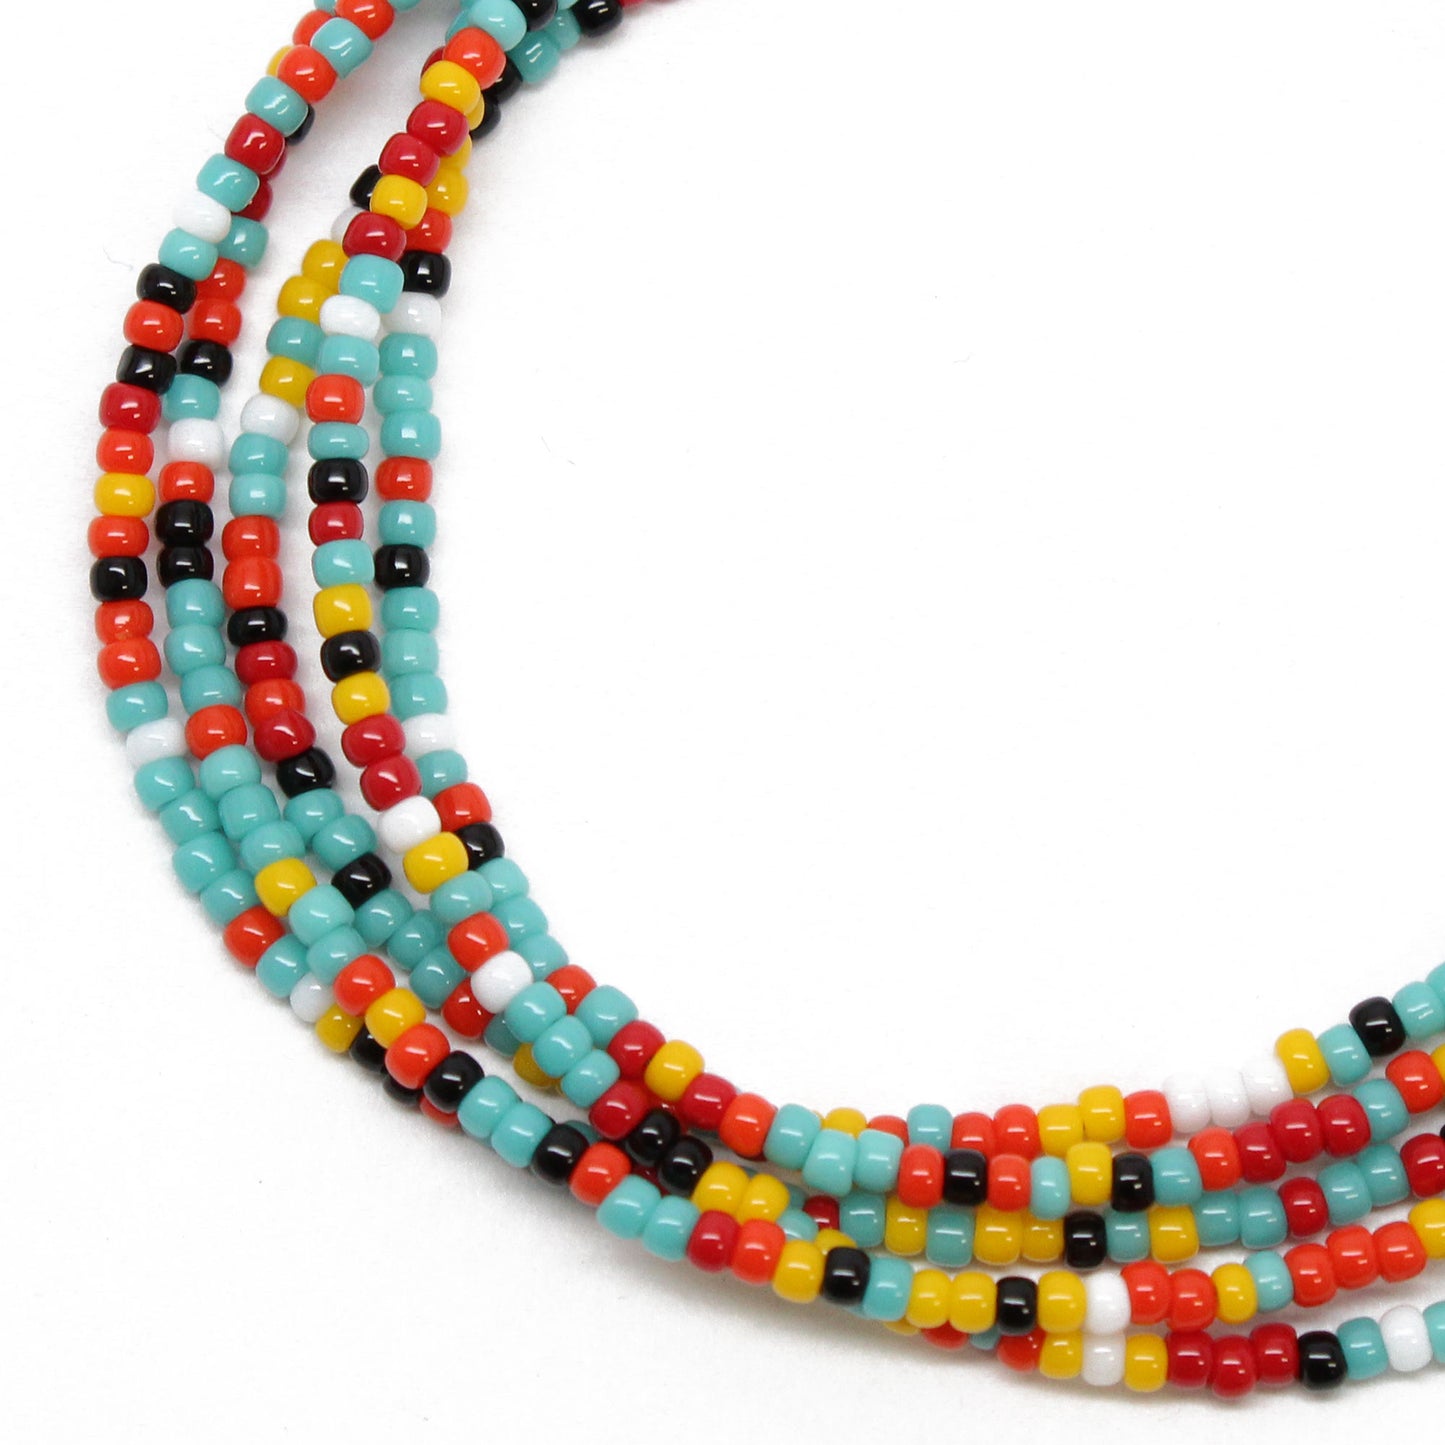 Turquoise Seed Bead Necklace Matte Finish, Thin 1.5mm Single Strand 14